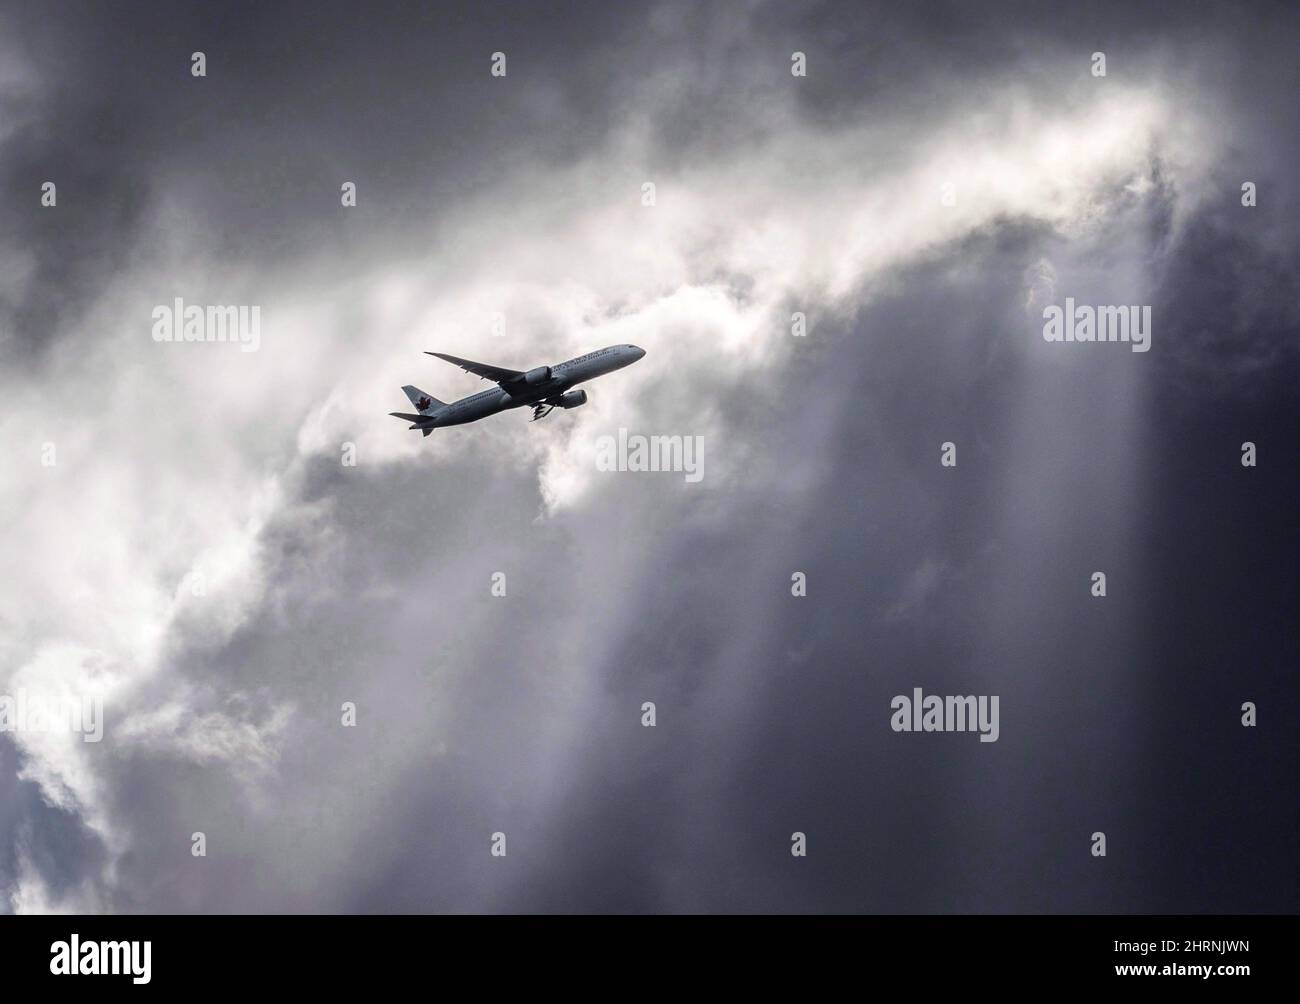 An Air Canada plane flies underneath dark clouds illuminated by some sun rays above Frankfurt, Germany, Thursday, March 2, 2017. Aimia Inc. says it plans to defend itself against a move by Air Canada in Quebec Superior Court to halt a merger that the smaller company sees as key to its corporate reinvention. THE CANADIAN PRESS/AP-Frank Rumpenhorst/dpa via AP Stock Photo